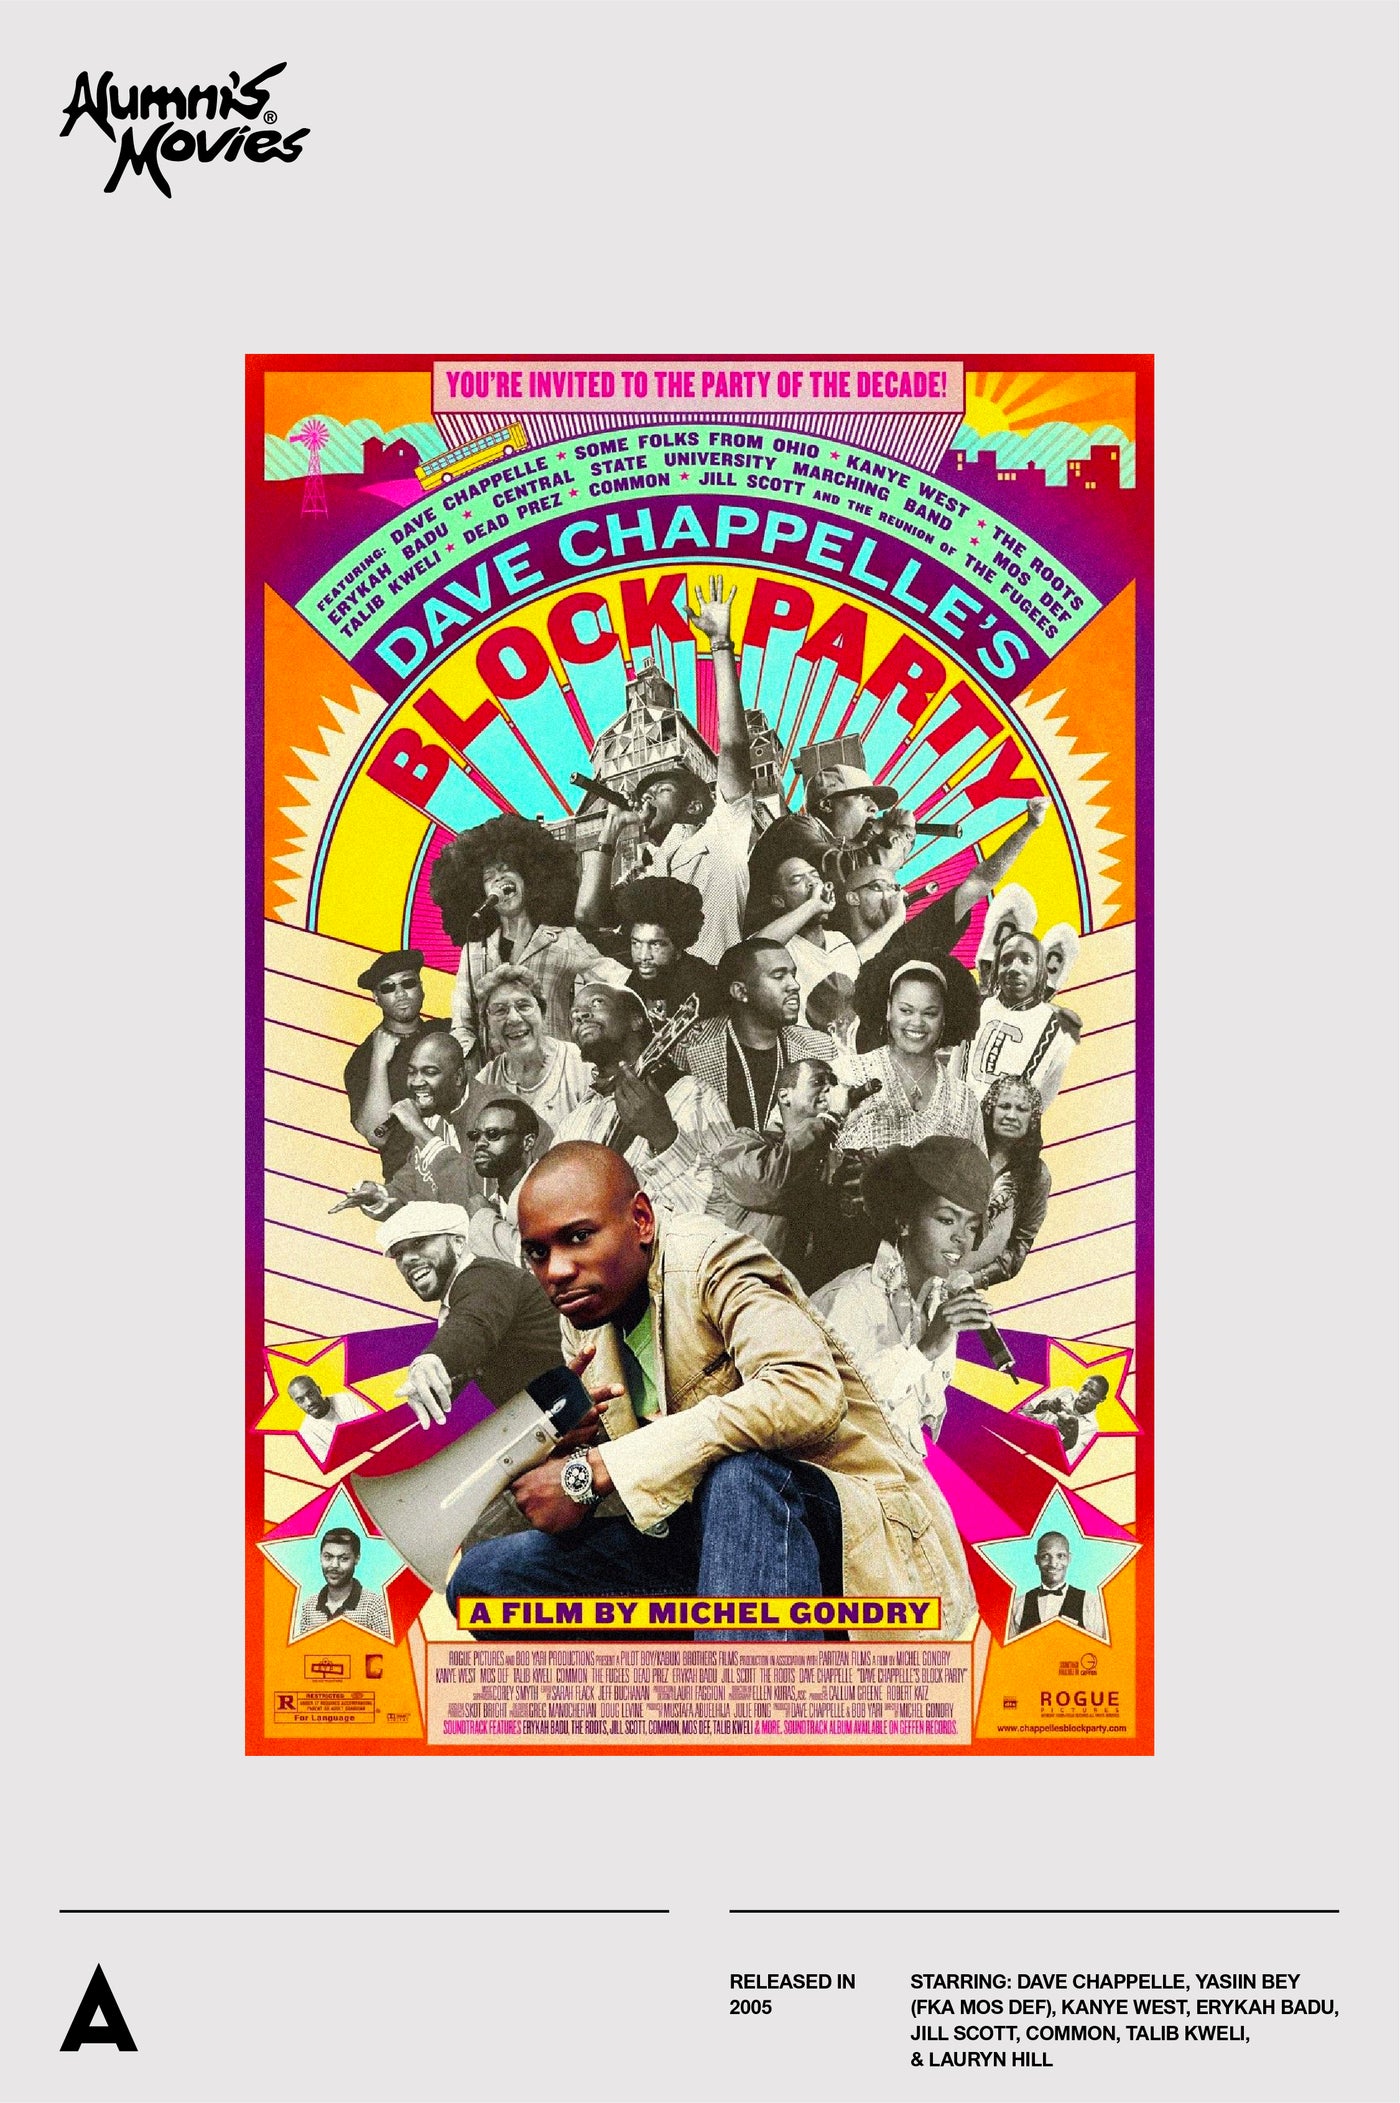 ALUMNI'S MOVIES | Dave Chappelle's Block Party